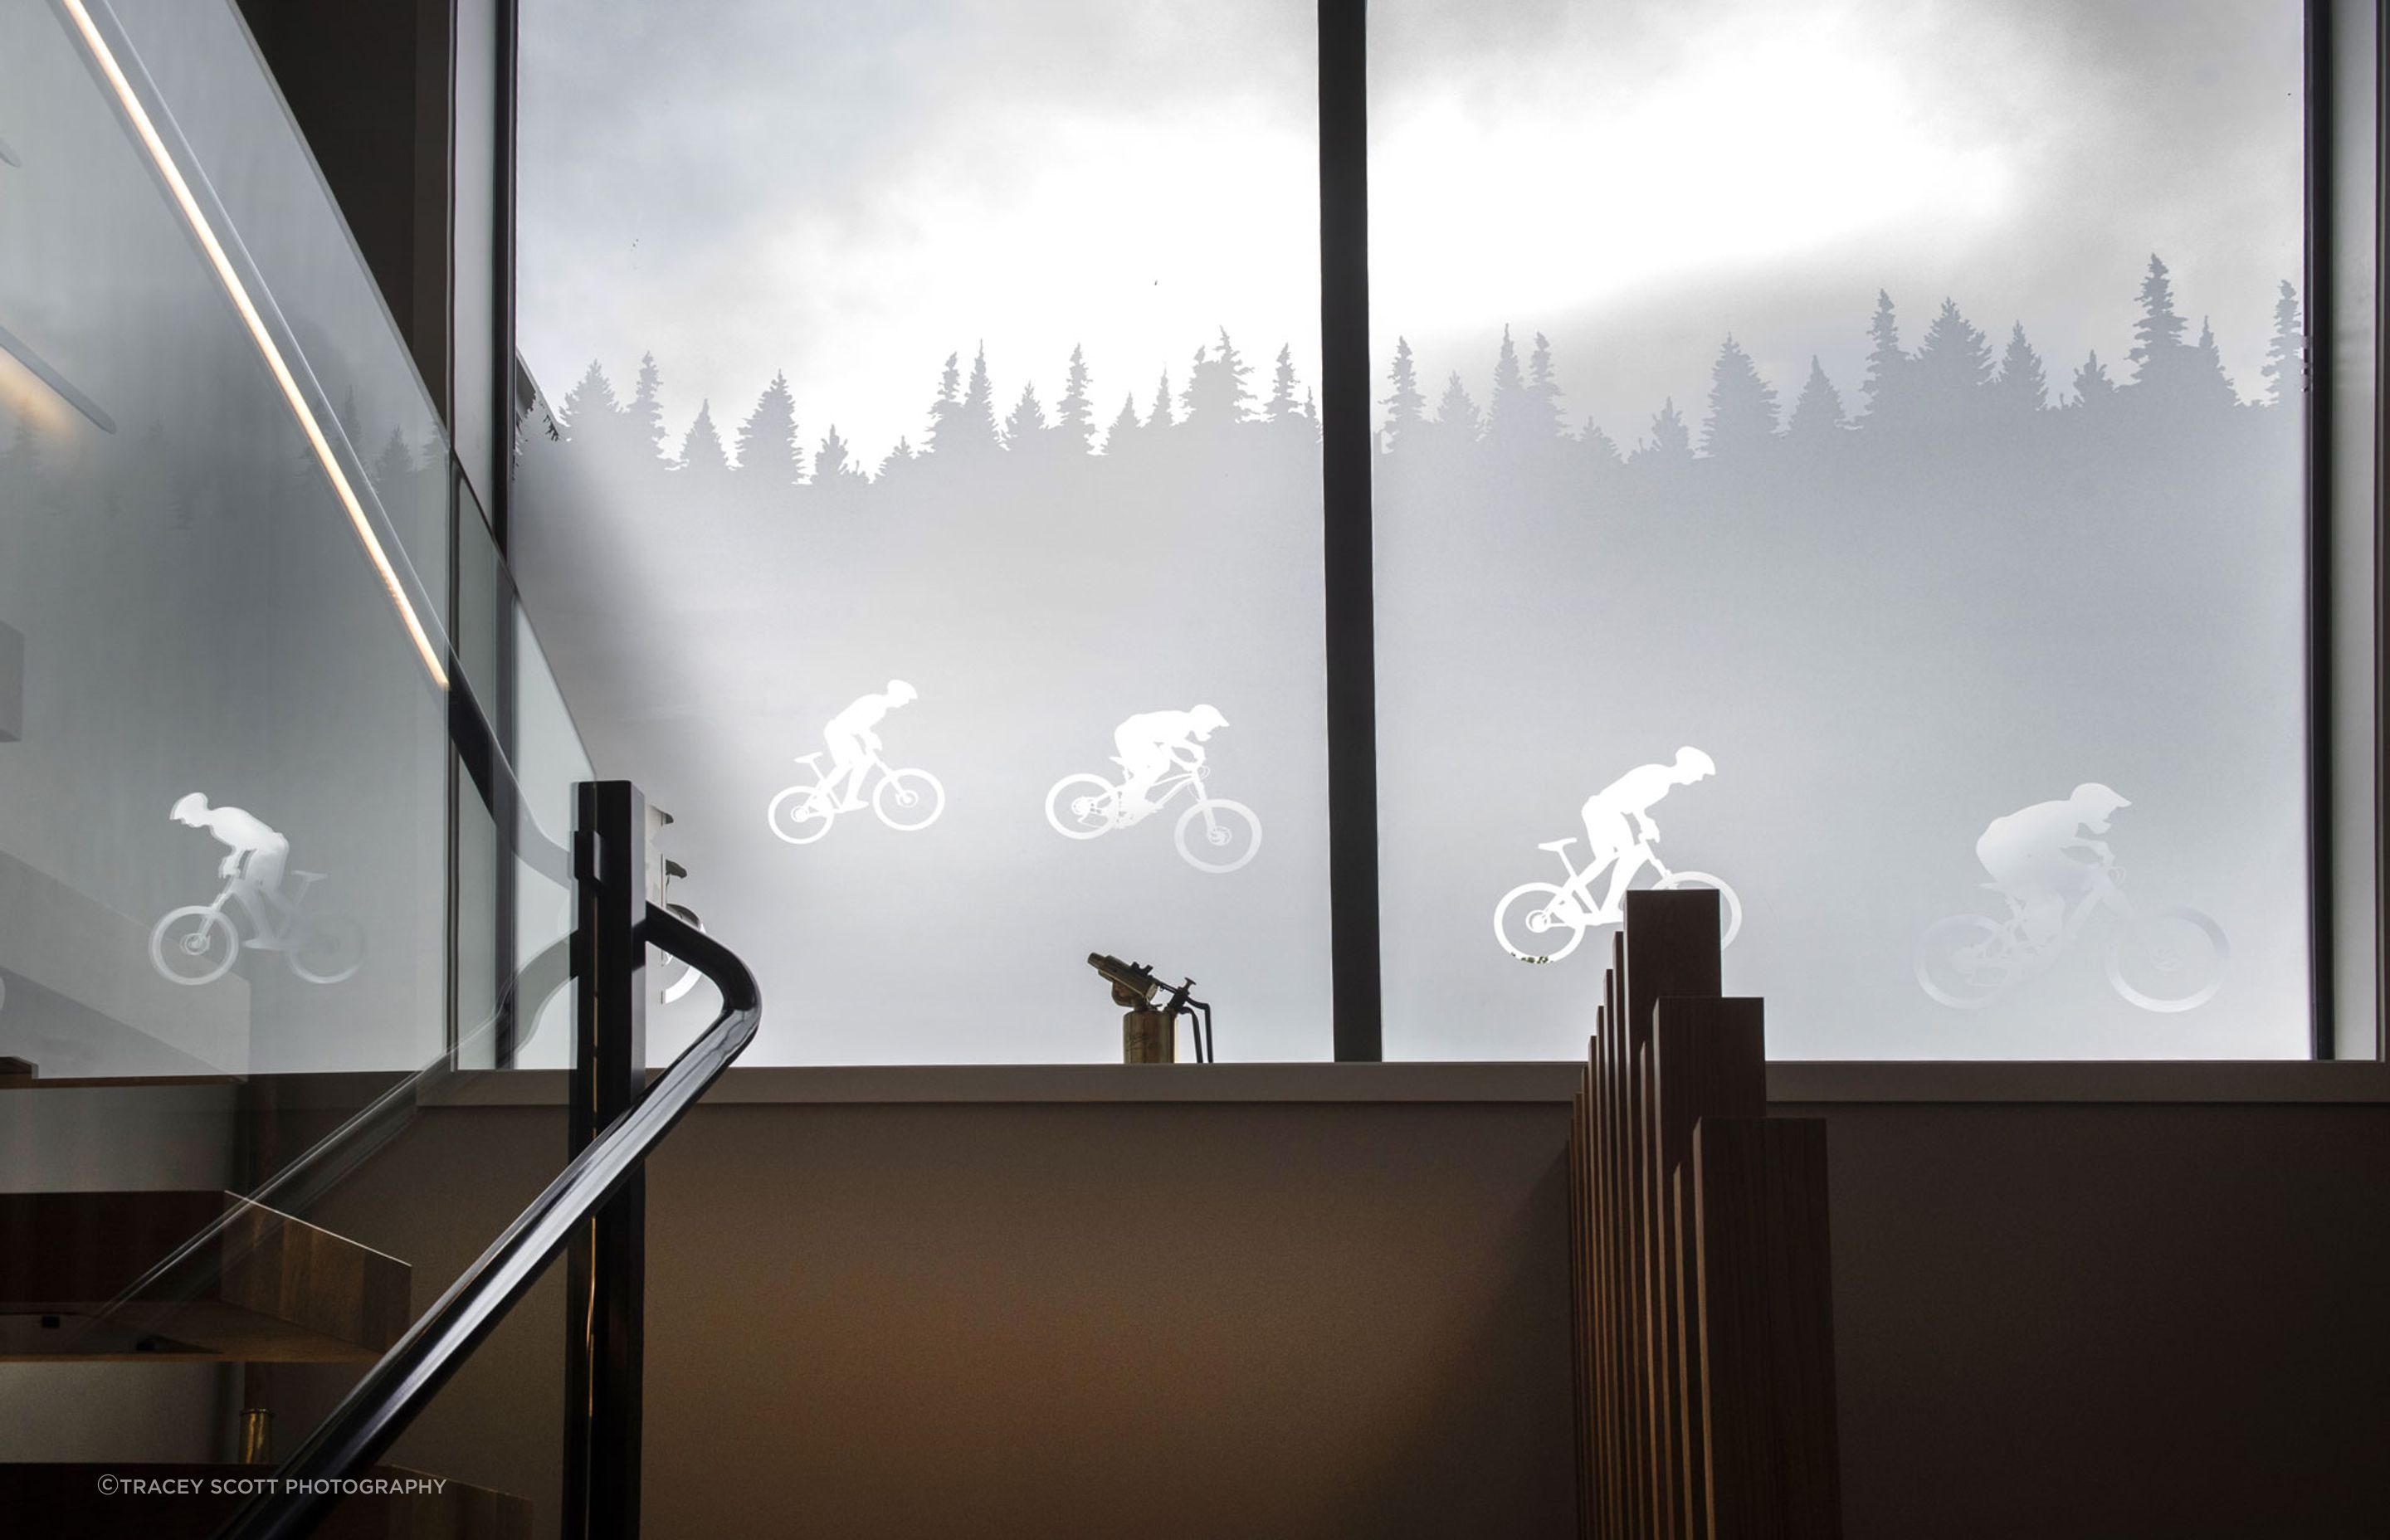 Window film to hide the neighbours roof has images of the nearby forest and cyclists